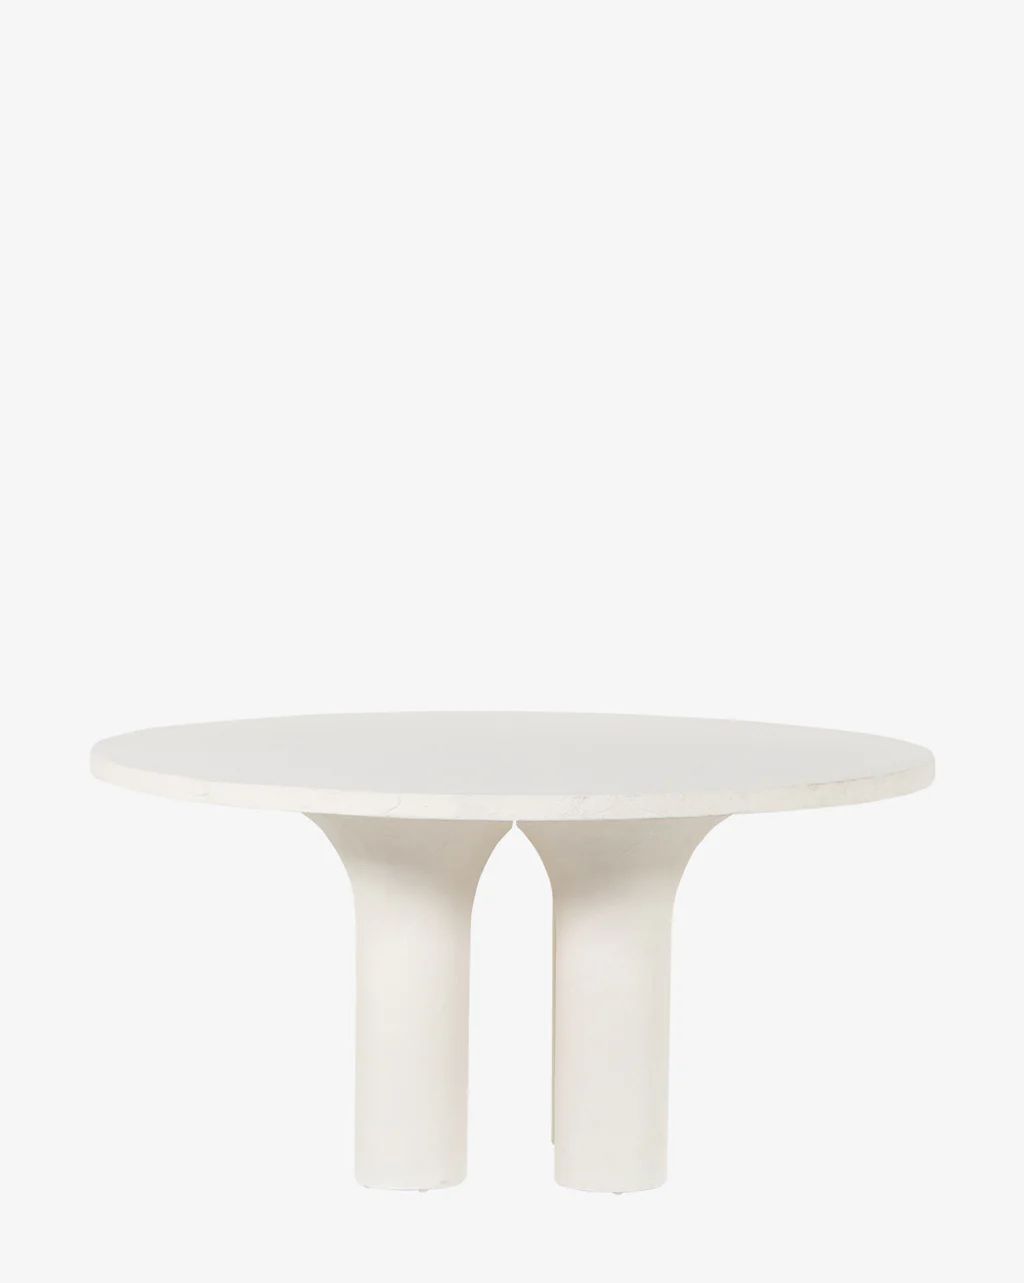 Wynne Dining Table | McGee & Co.